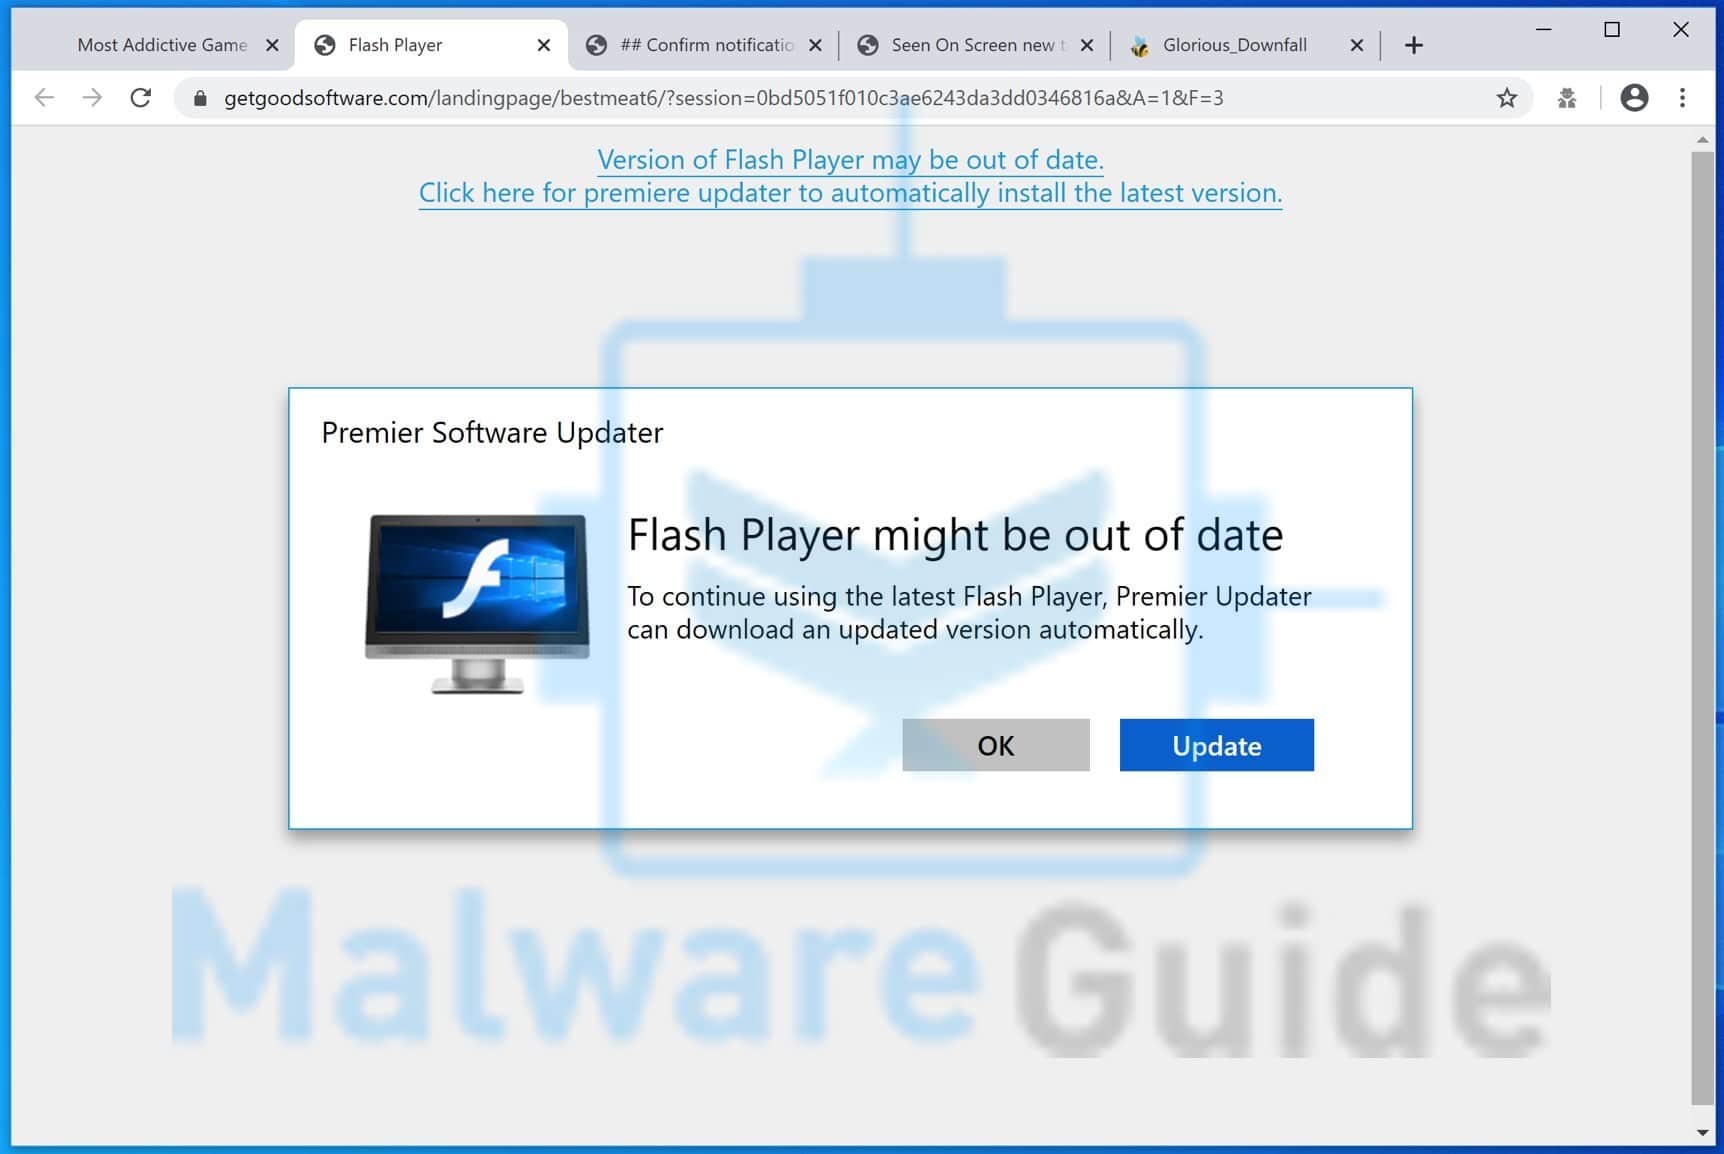 Flash Player Might be out of date